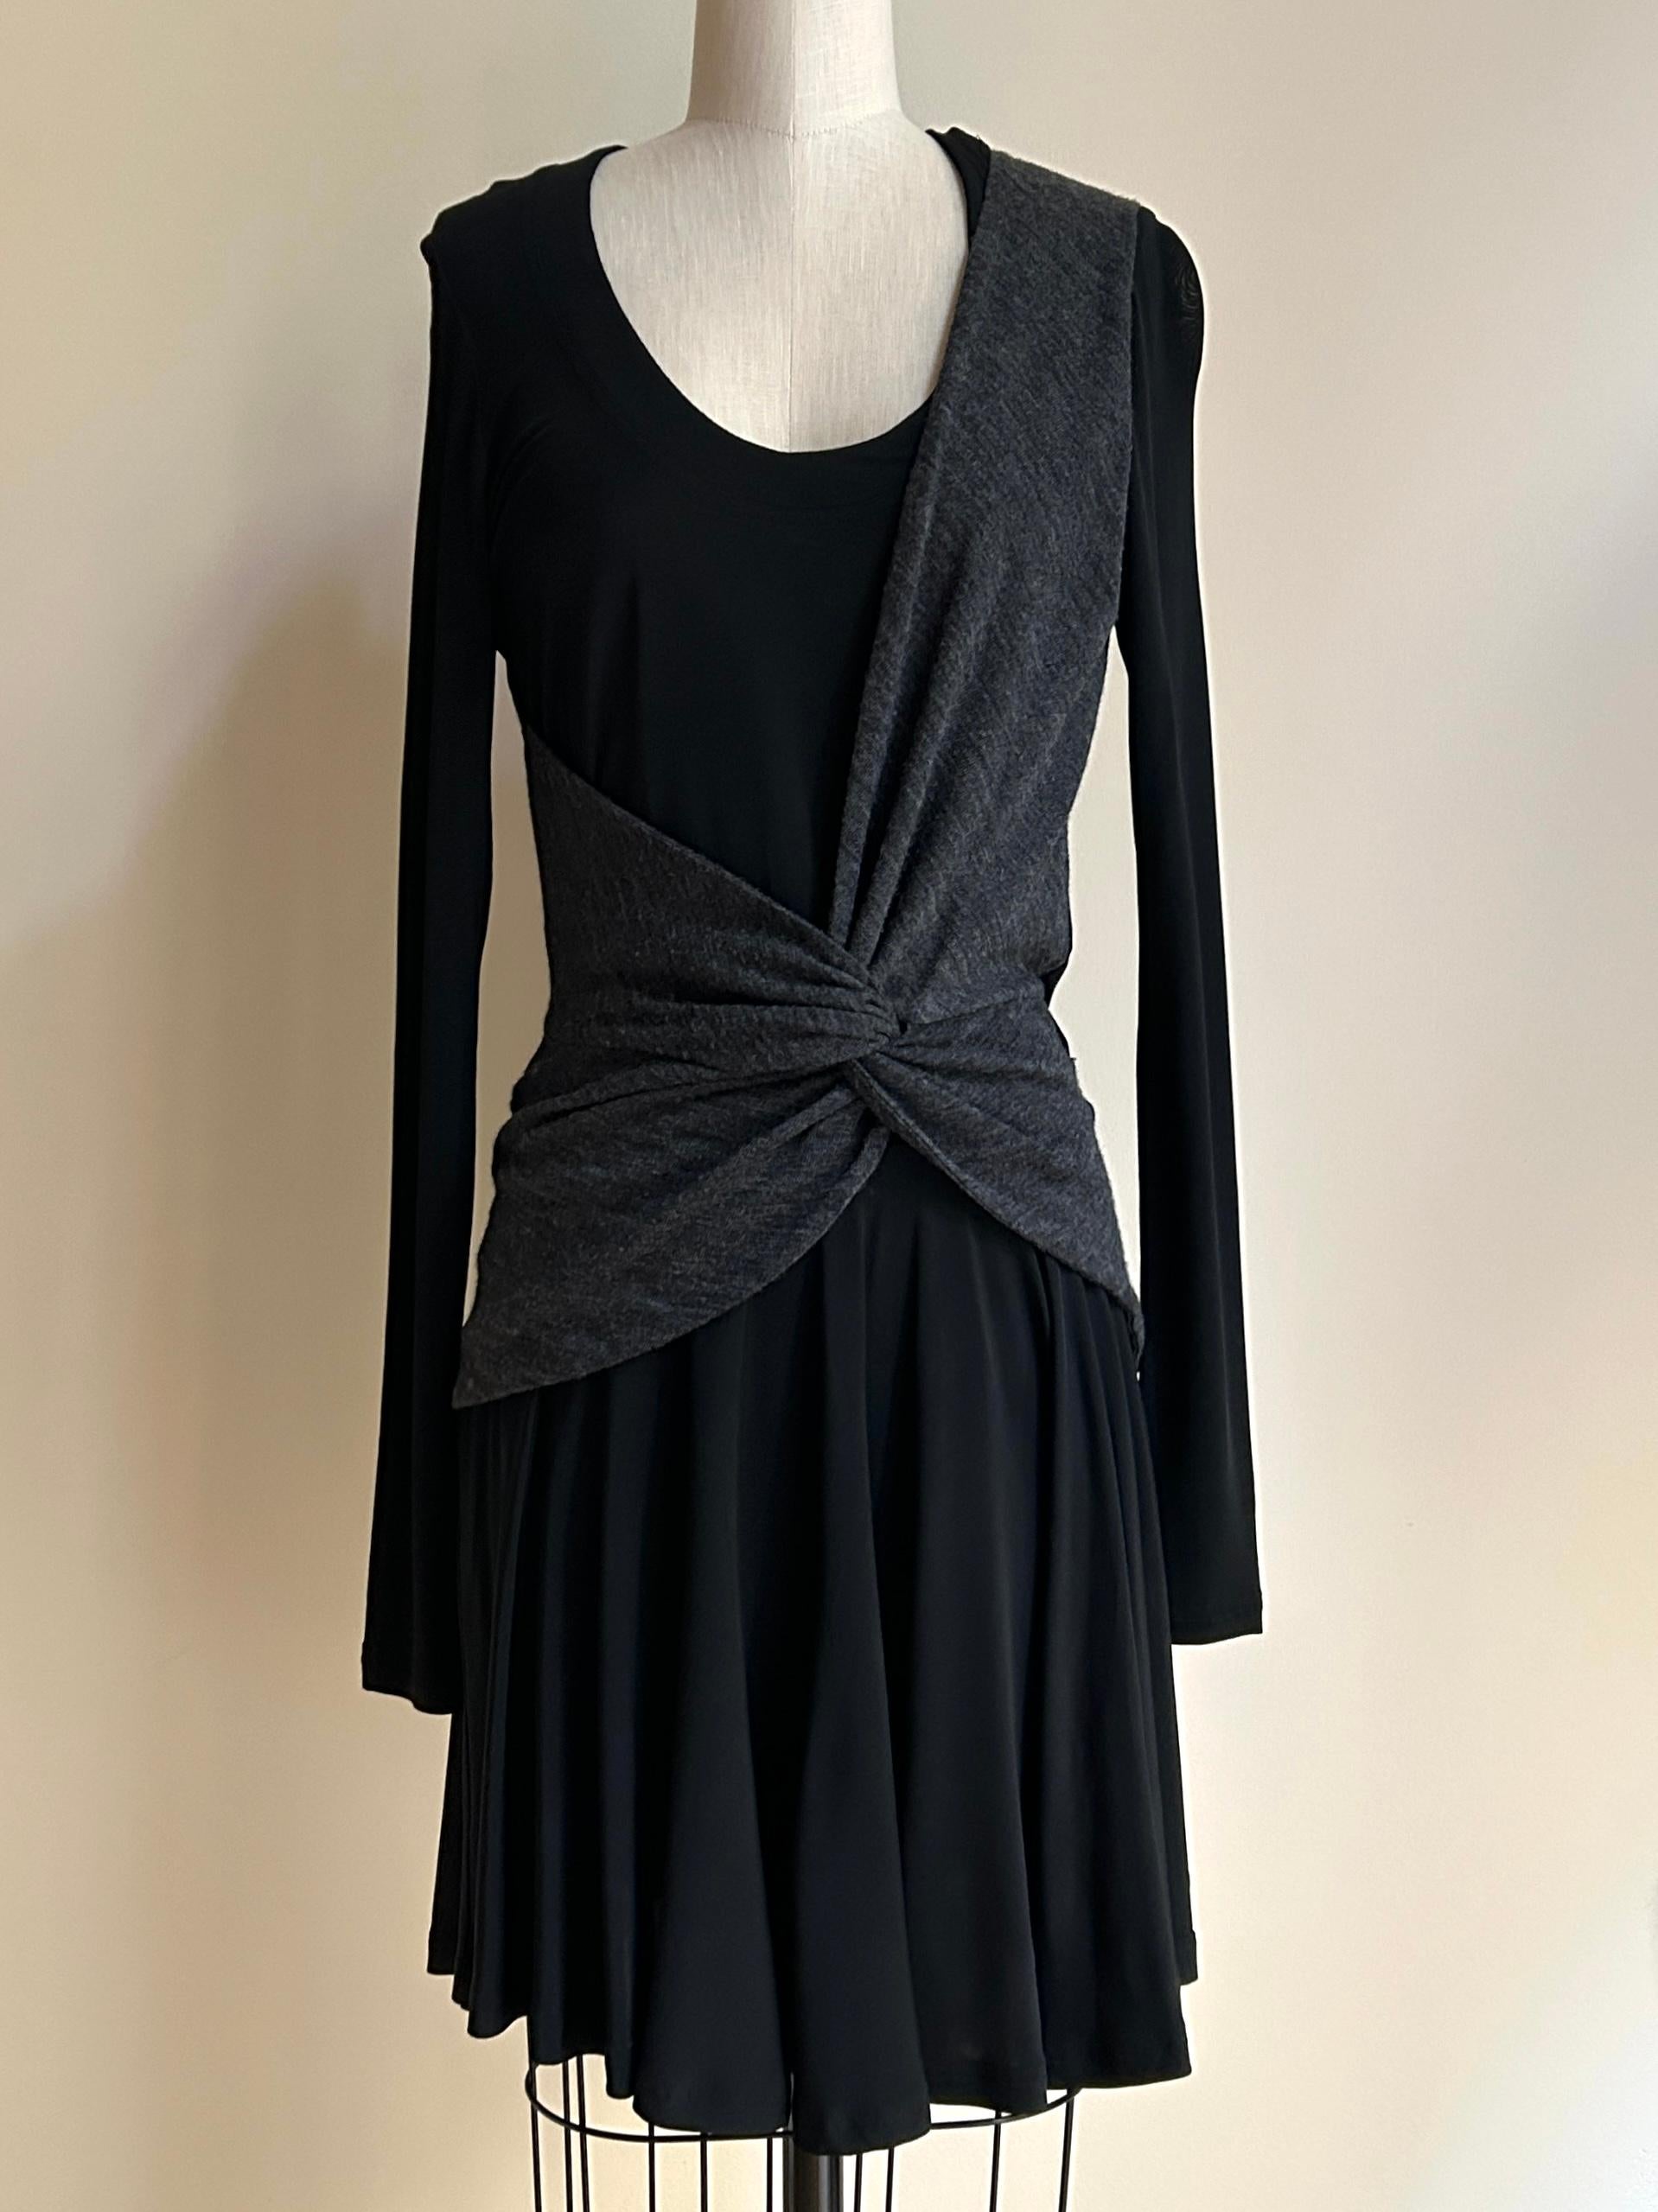 Balenciaga 2004 by Nicolas Ghesquiere black jersey dress features a charcoal wrap inspired by a ballerina's practice attire. Scoop neck, long sleeve.

95% acetate, 5% spandex. 
Grey wrap feels like wool blend. 

Made in Italy.

Size IT 38,